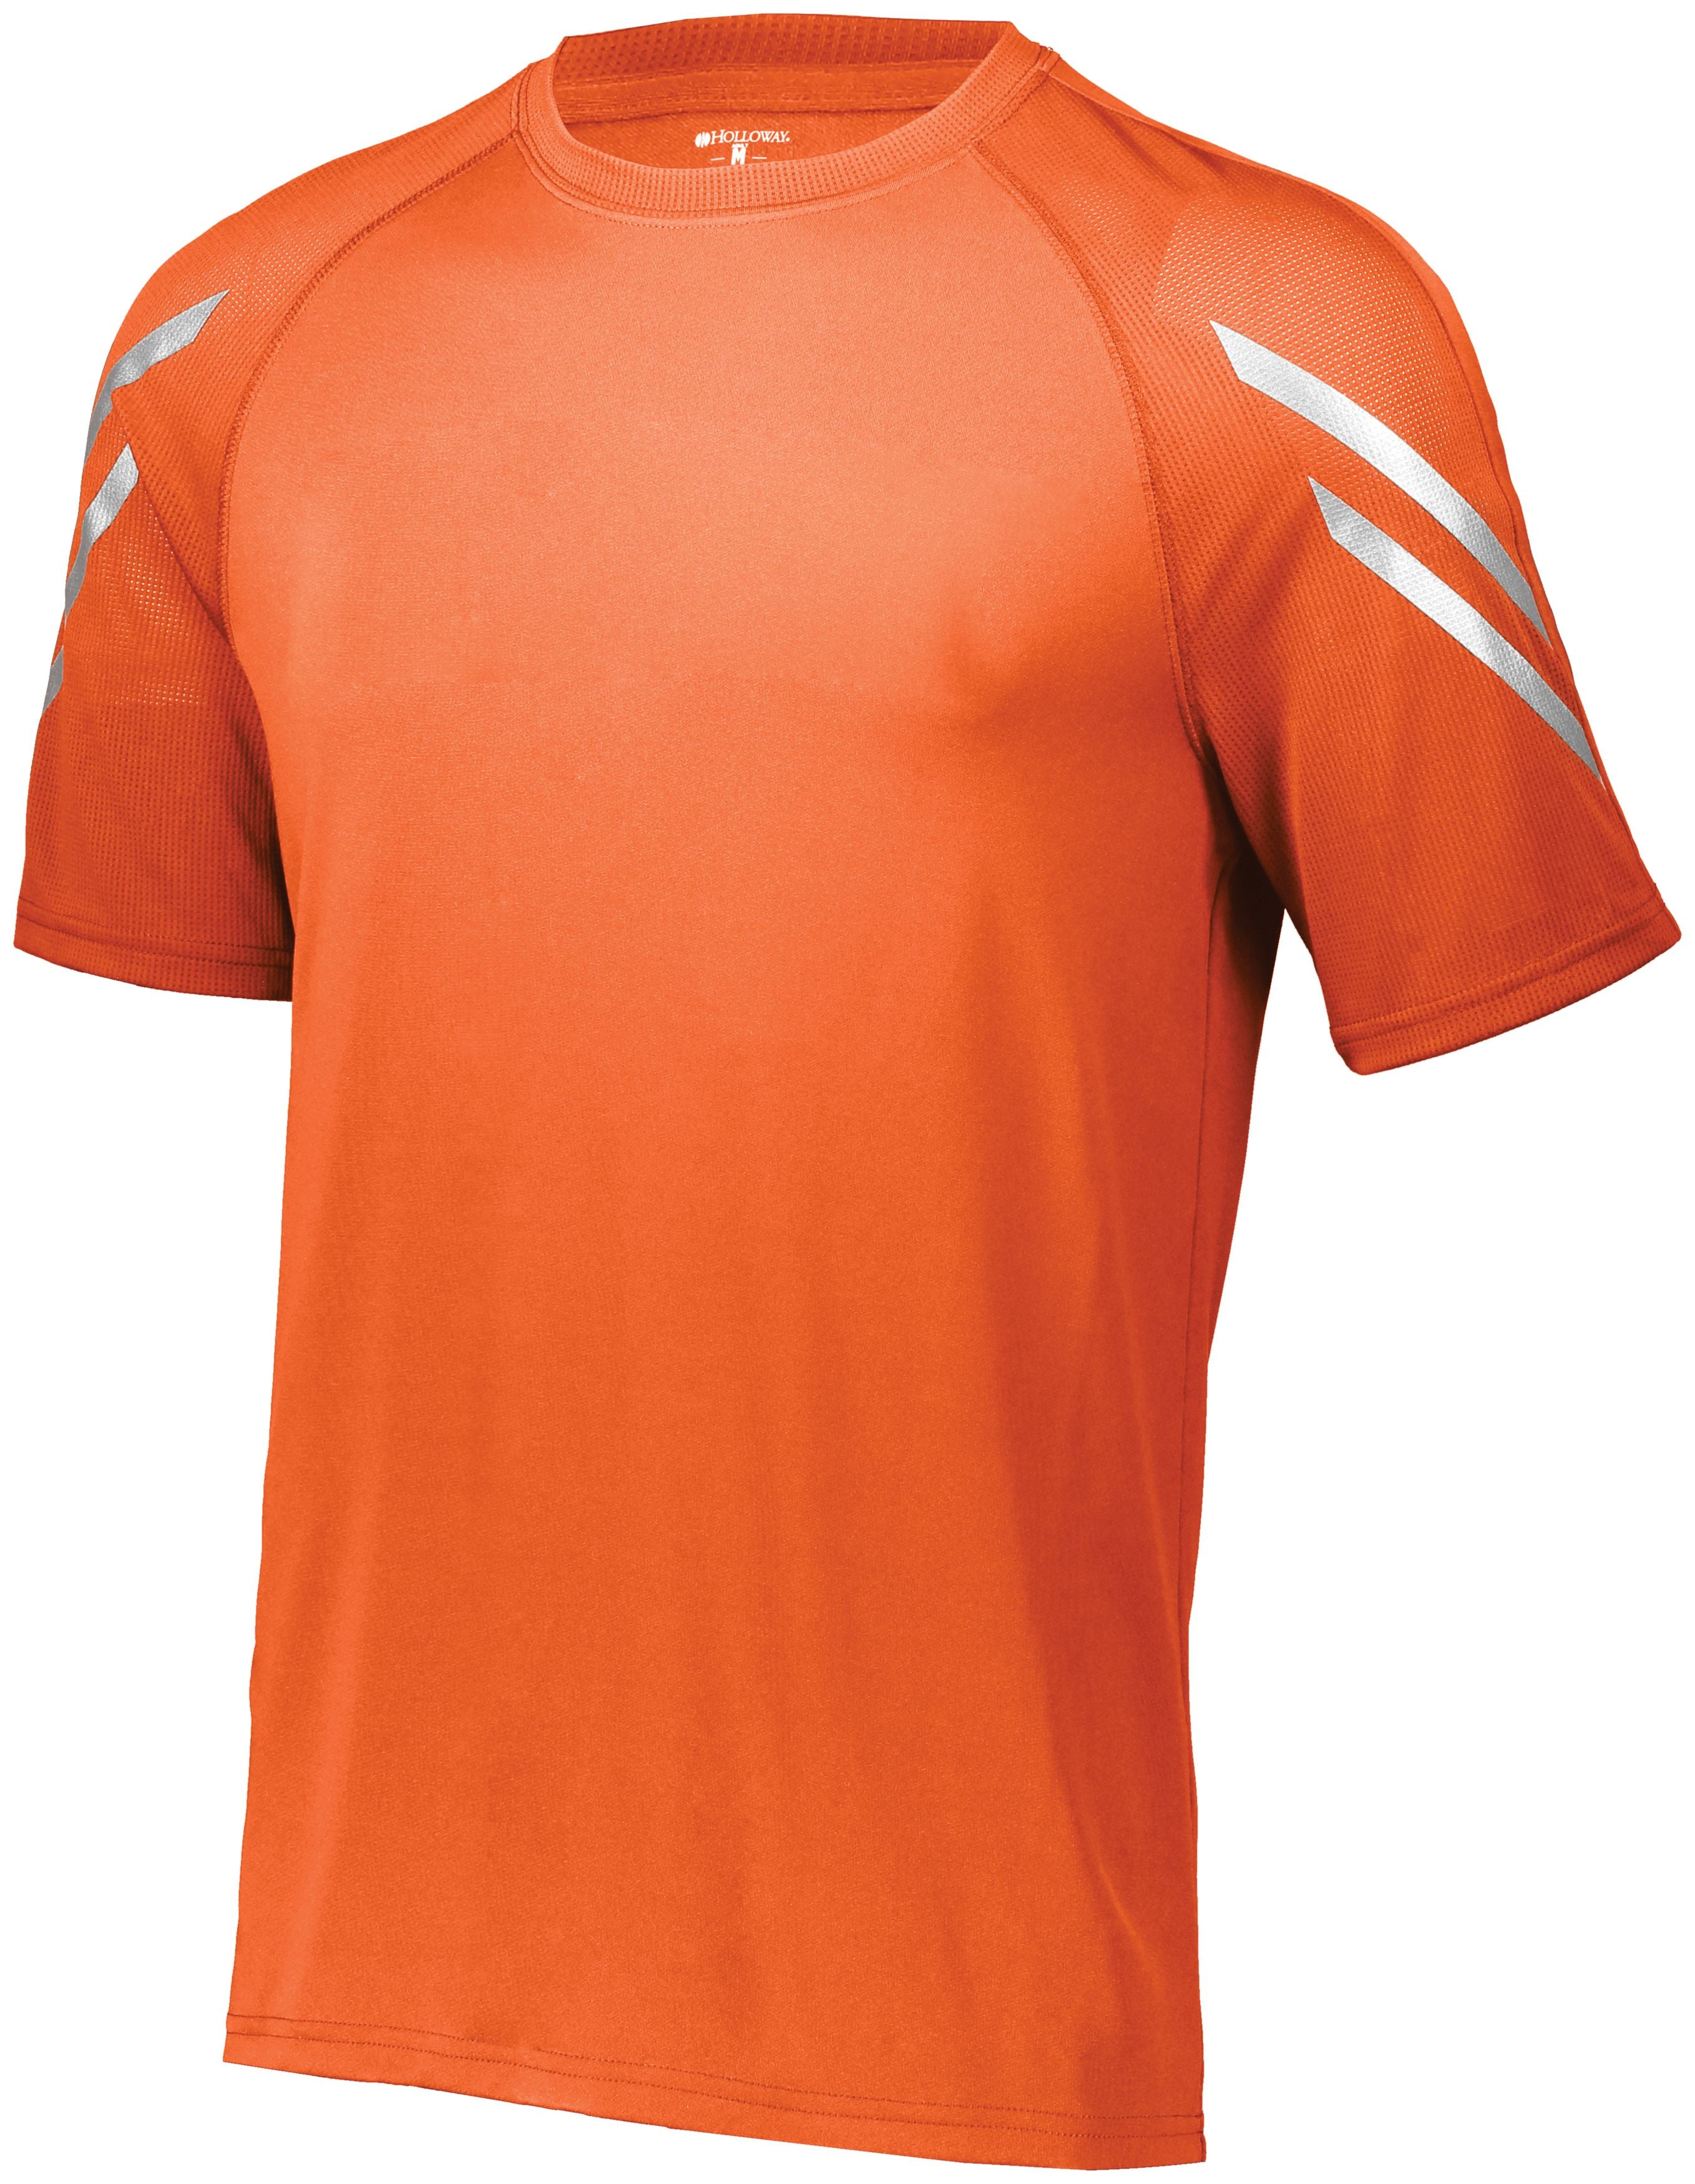 Holloway Flux Shirt Short Sleeve in Orange  -Part of the Adult, Holloway, Shirts, Flux-Collection product lines at KanaleyCreations.com